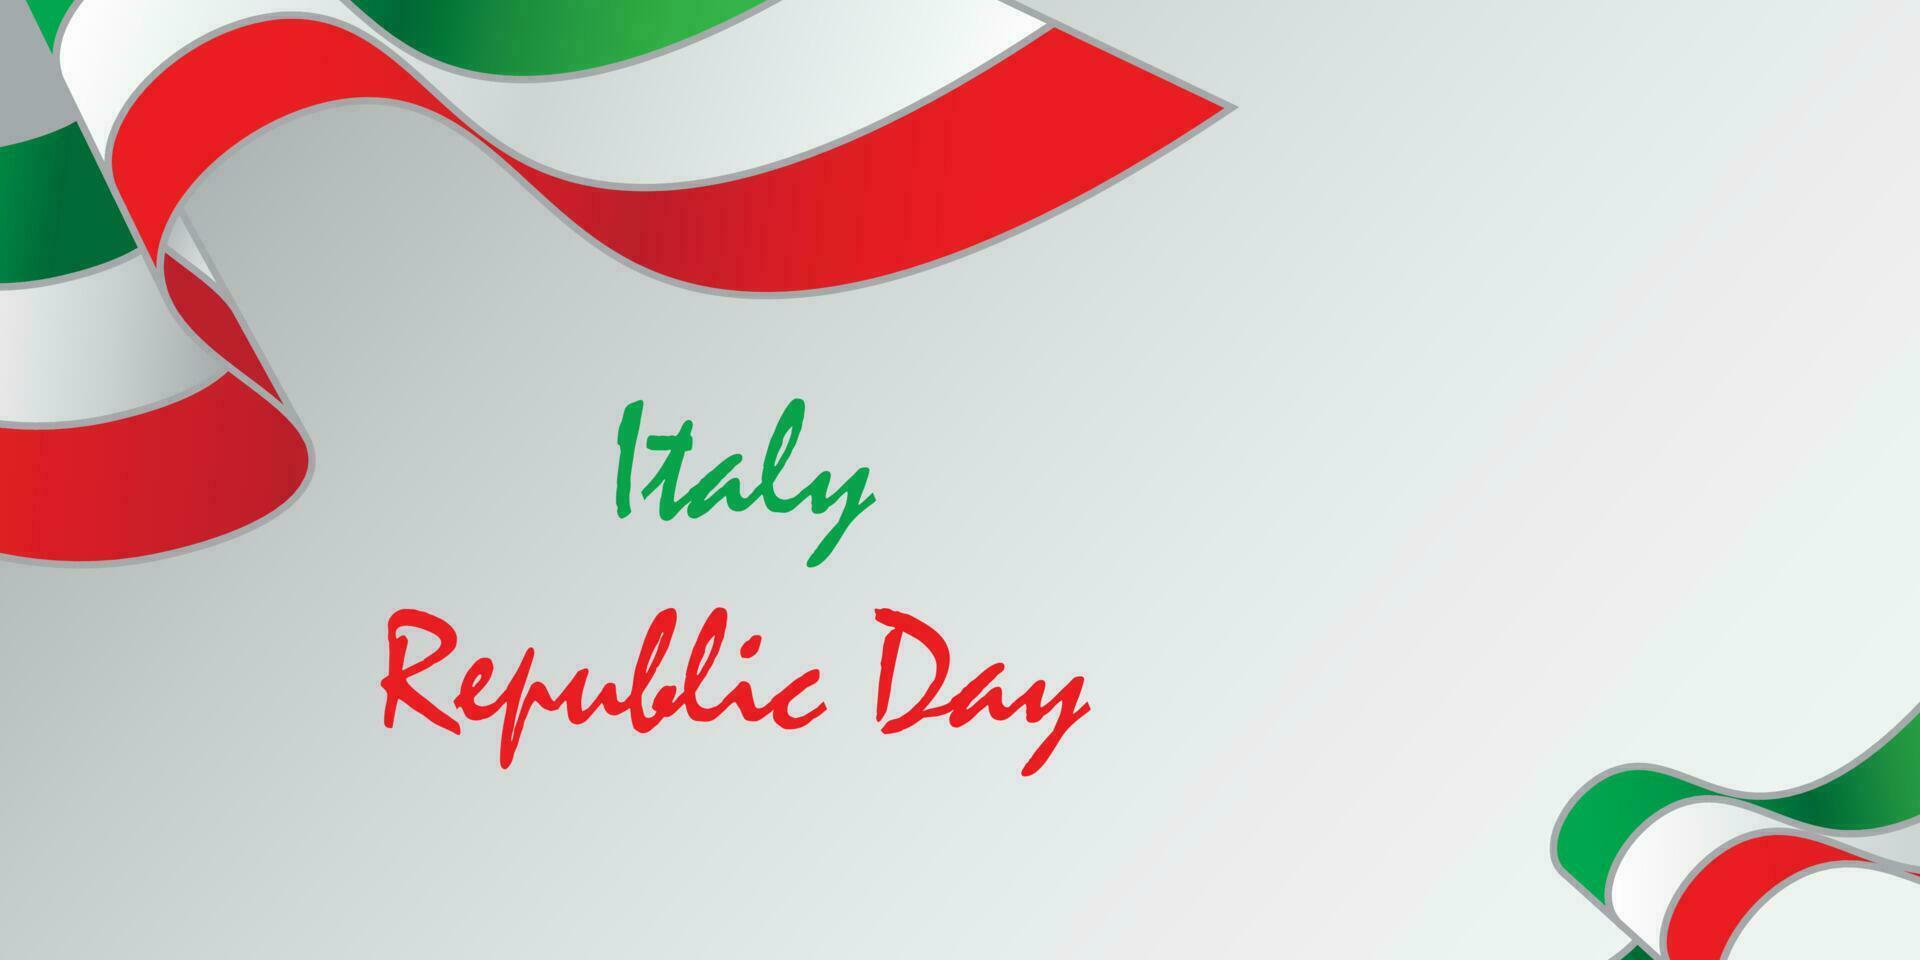 Background design with Italian republic day theme vector